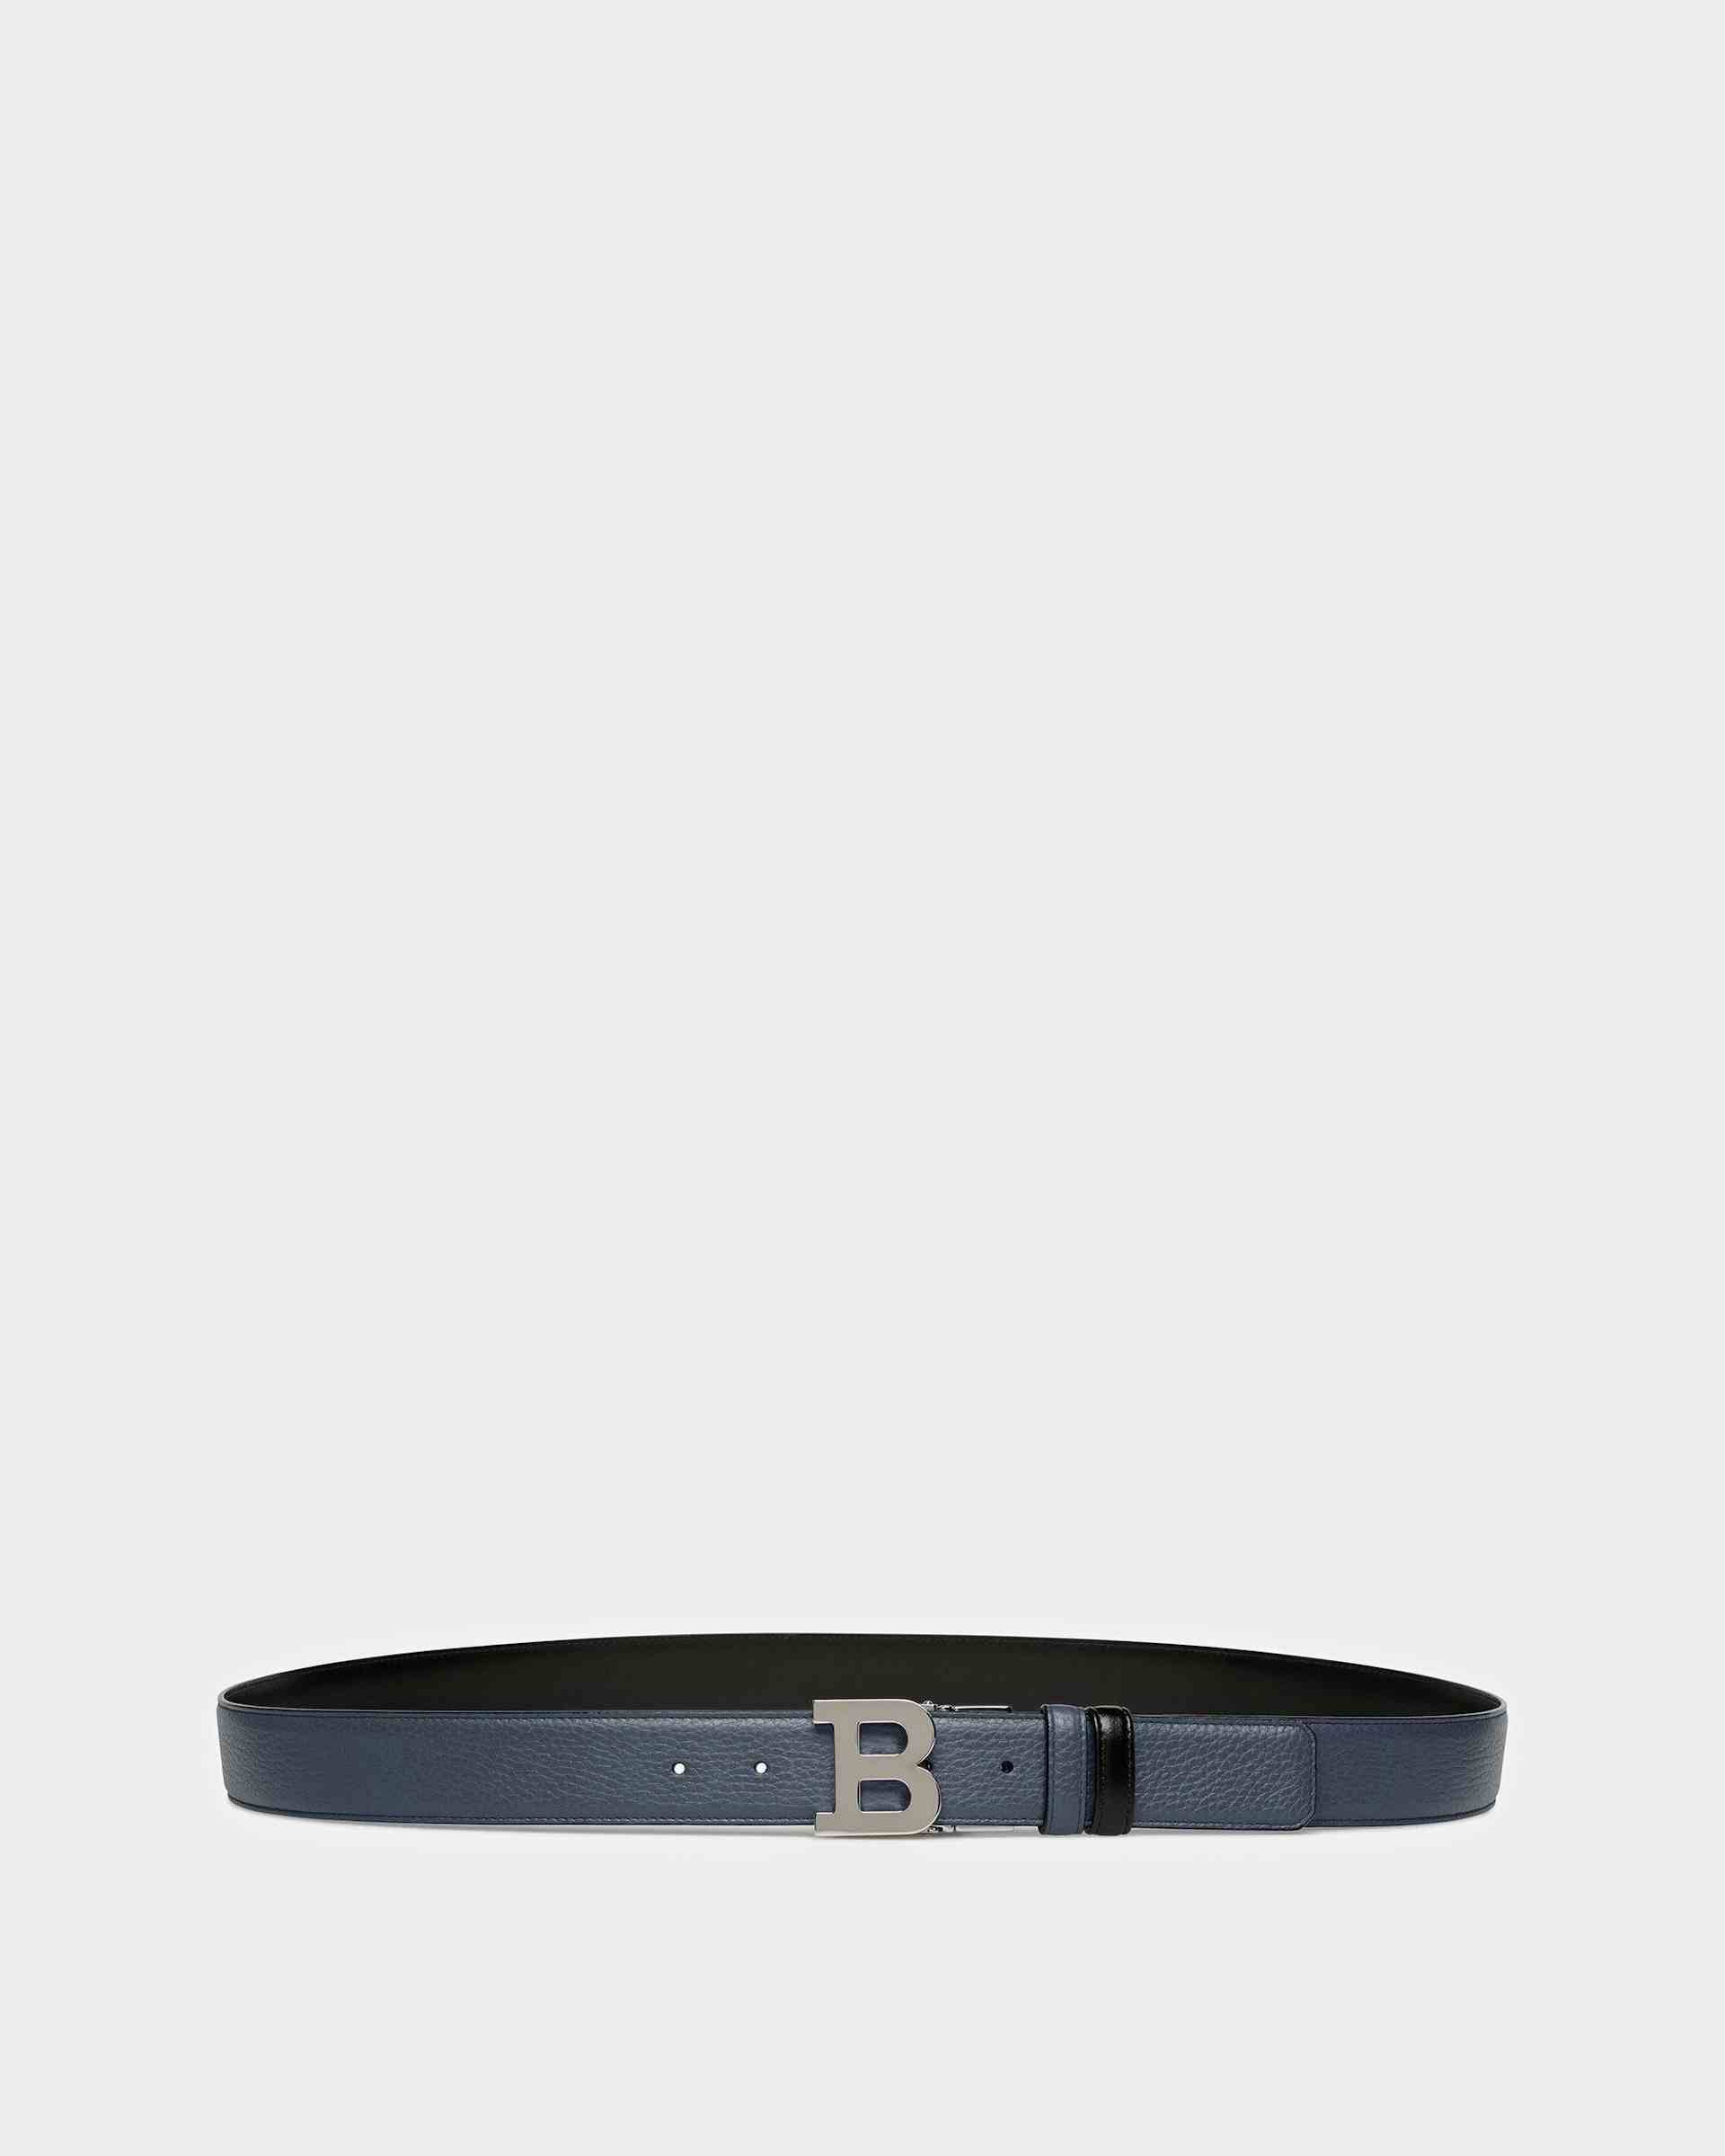 B Buckle Leather Belt In Midnight Blue And Black - Men's - Bally